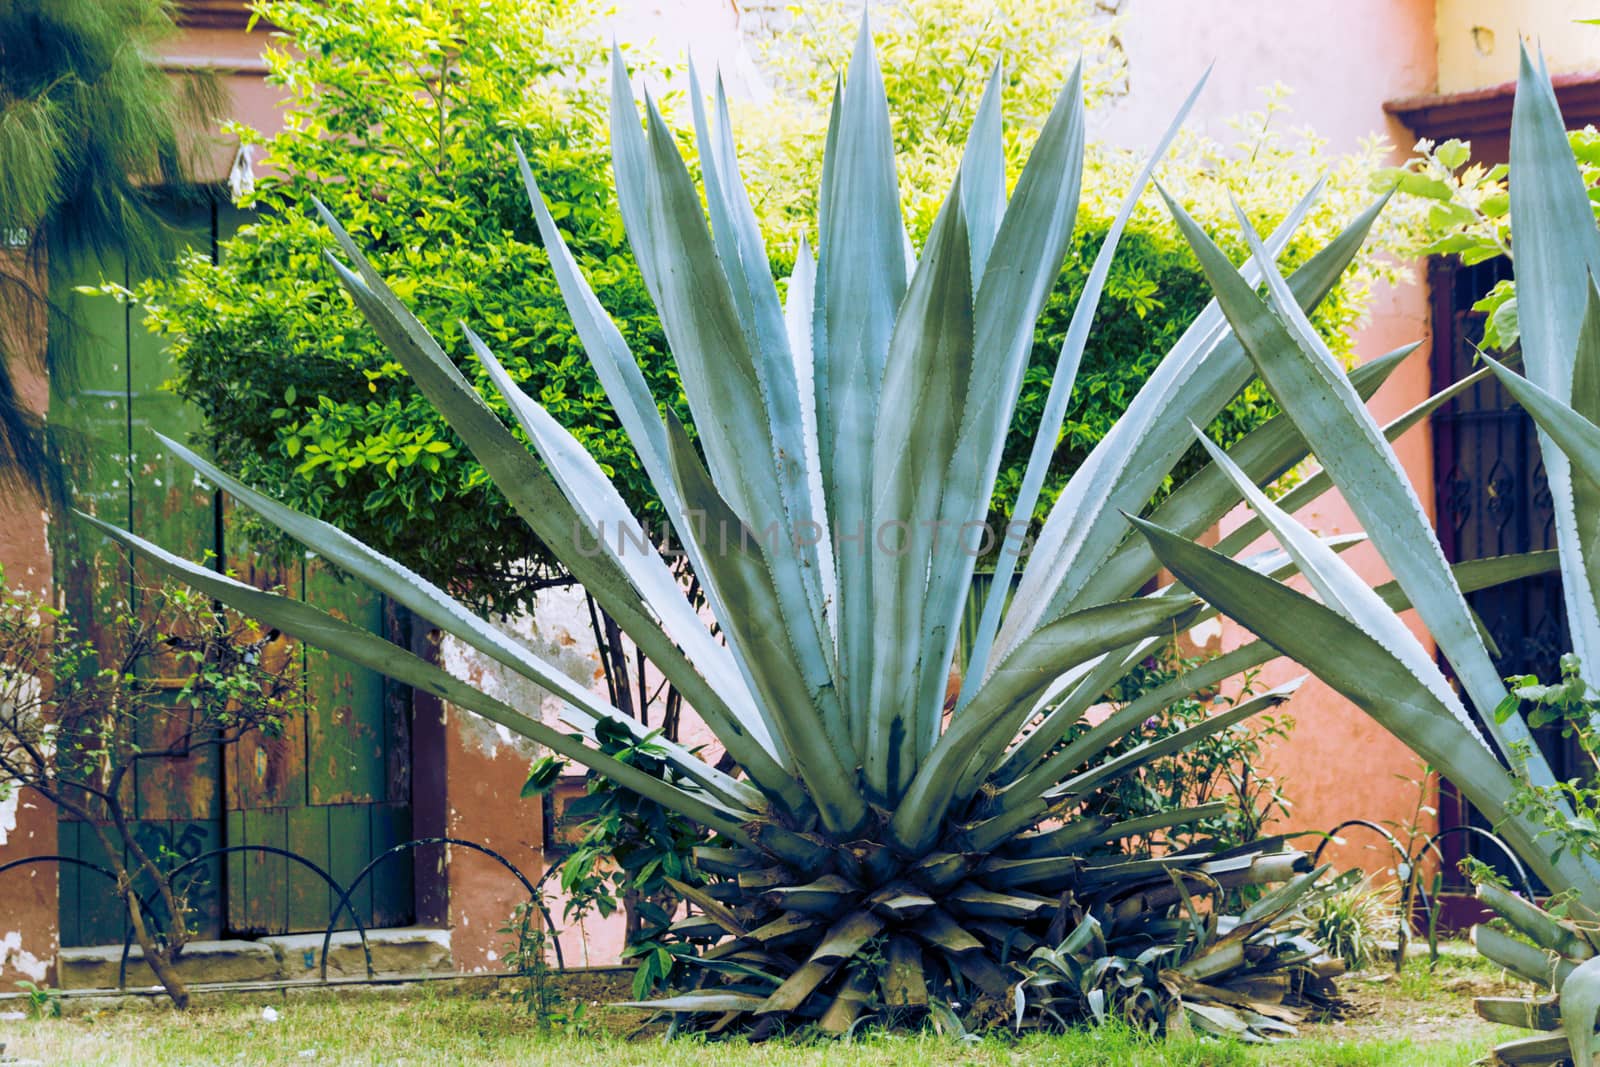 Photograph of some maguey traditional mexican green plants